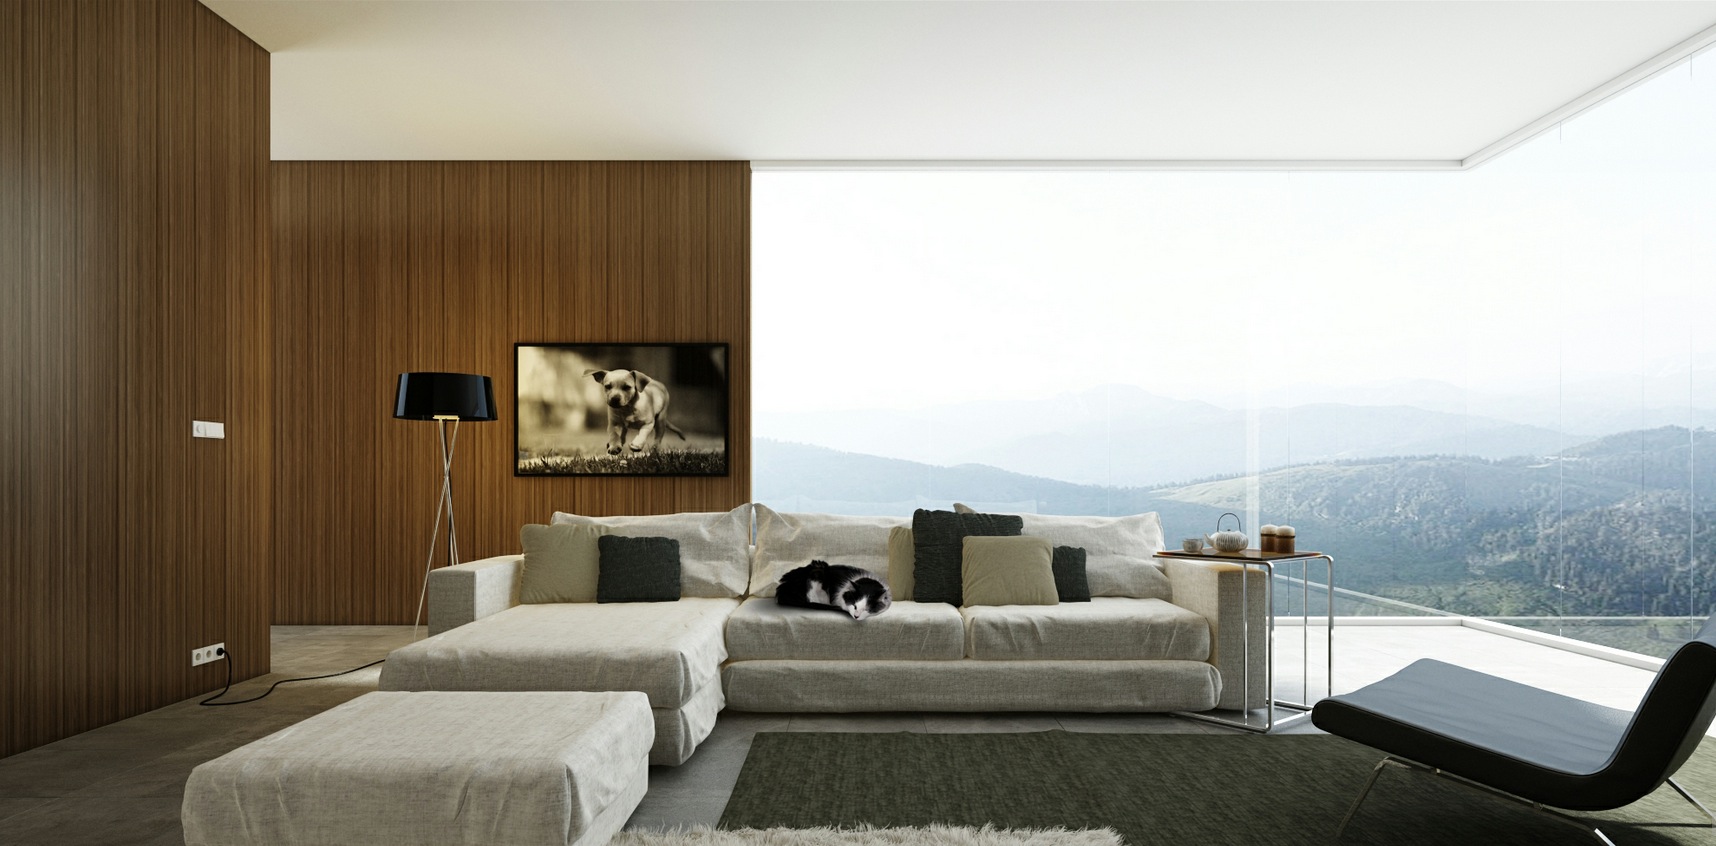 modern living room designs "width =" 1716 "height =" 846 "srcset =" https://mileray.com/wp-content/uploads/2020/05/1588517126_59_Living-Room-Designs-With-Great-View-And-Modern-Decor-Looks.jpeg 1716w, https://mileray.com/wp -content / uploads / 2016/08 / Elyas-300x148.jpeg 300w, https://mileray.com/wp-content/uploads/2016/08/Elyas-768x379.jpeg 768w, https://mileray.com/wp -content / uploads / 2016/08 / Elyas-1024x505.jpeg 1024w, https://mileray.com/wp-content/uploads/2016/08/Elyas-324x160.jpeg 324w, https://mileray.com/wp -content / uploads / 2016/08 / Elyas-696x343.jpeg 696w, https://mileray.com/wp-content/uploads/2016/08/Elyas-1068x527.jpeg 1068w, https://mileray.com/wp -content / uploads / 2016/08 / Elyas-852x420.jpeg 852w "sizes =" (maximum width: 1716px) 100vw, 1716px